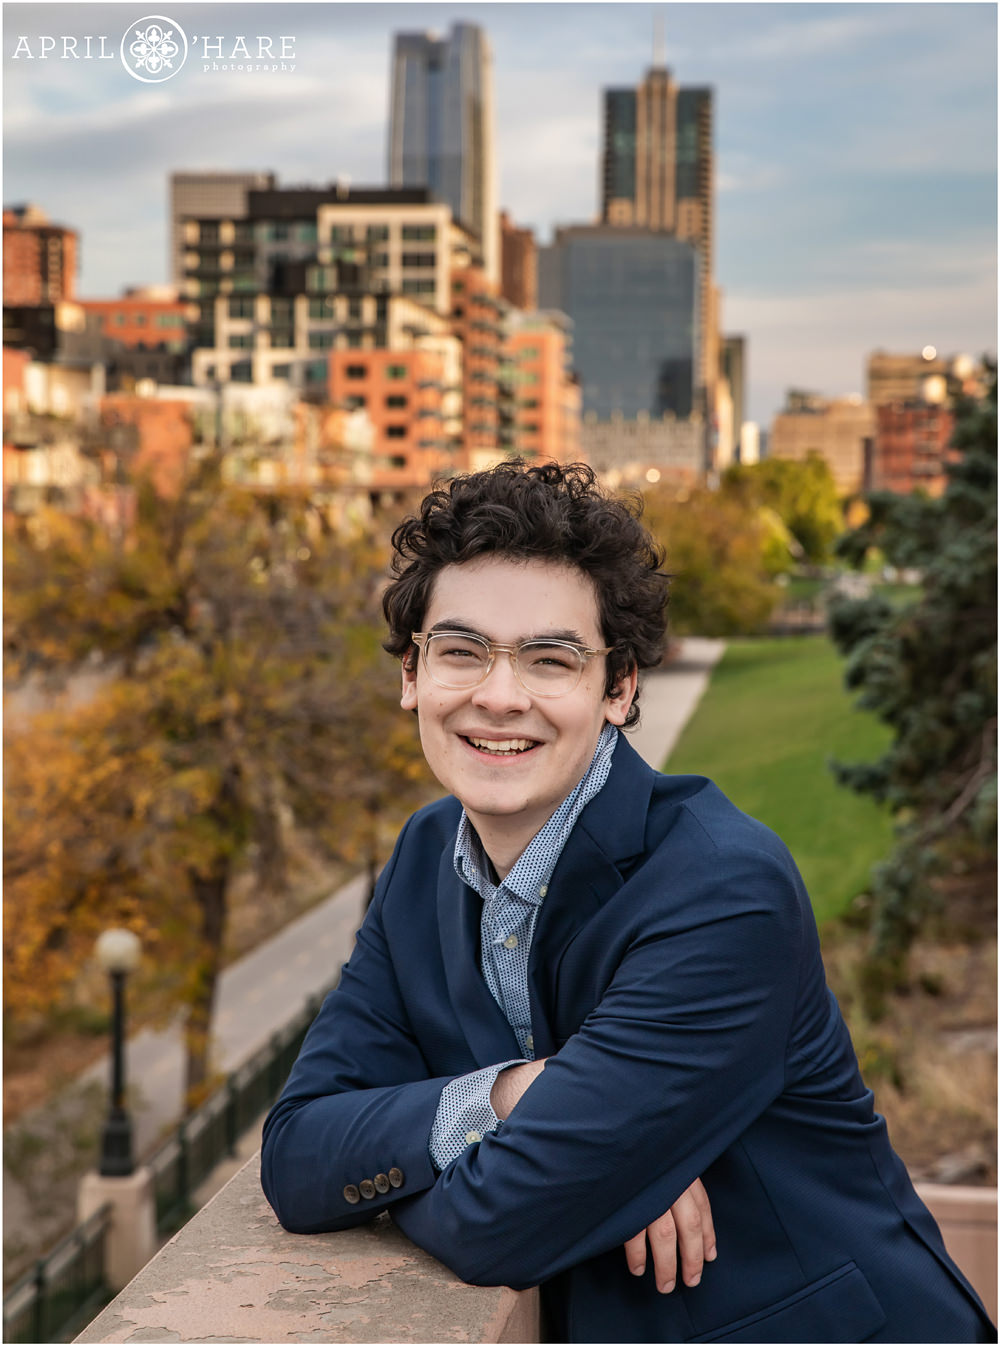 Young man with dark curly hair and glasses poses on a staircase along the Cherry Creek Trail in downtown Denver with a view of the city in the backdrop